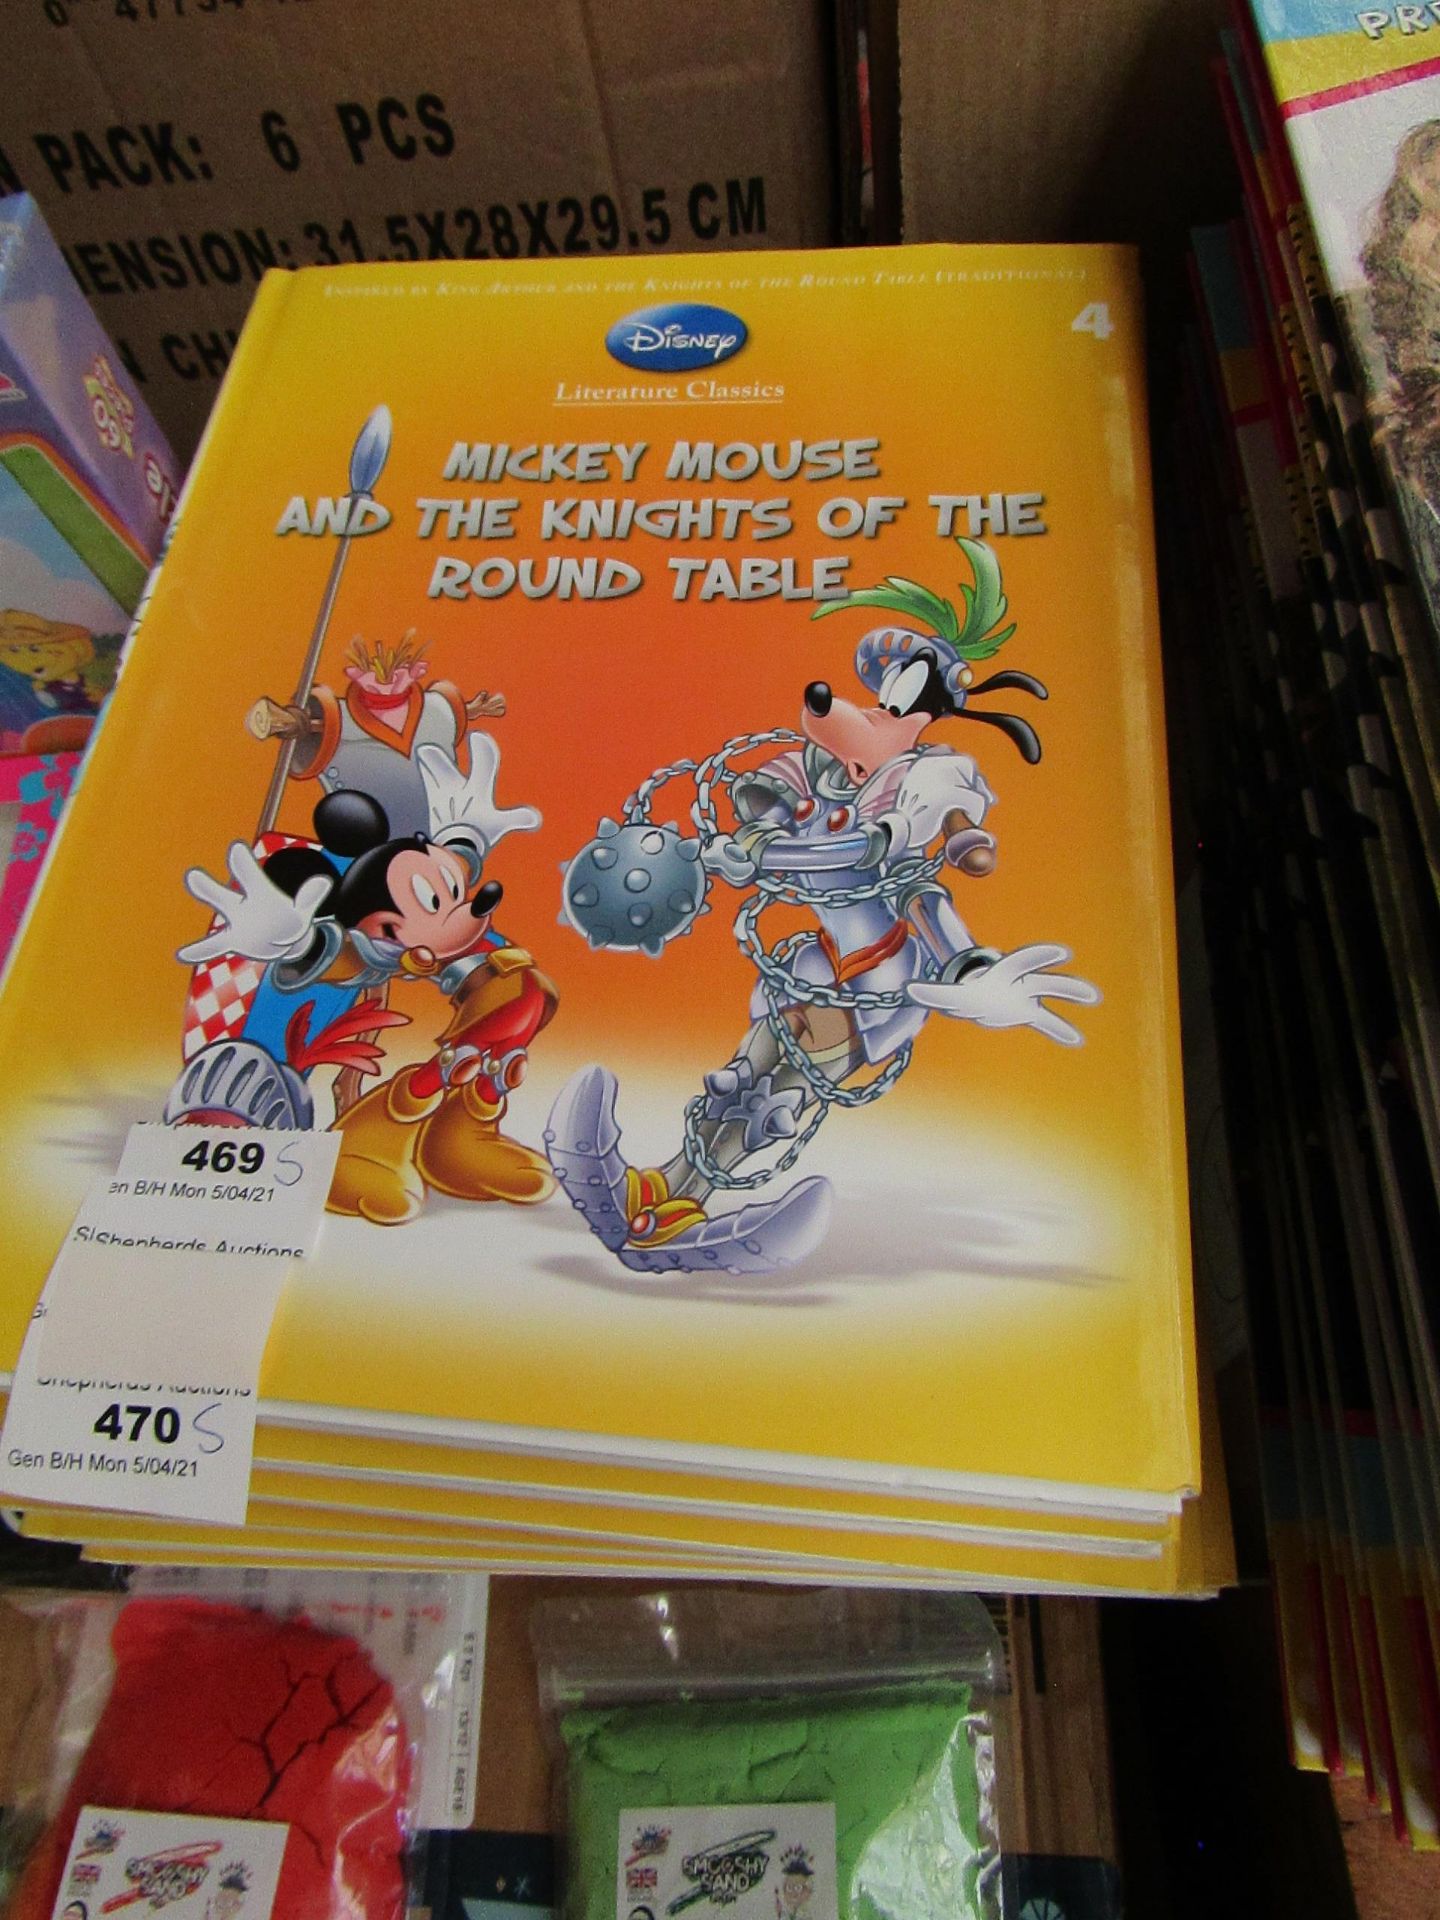 5x Disney Mickey Mouse nad the Knights of the round table books, unused